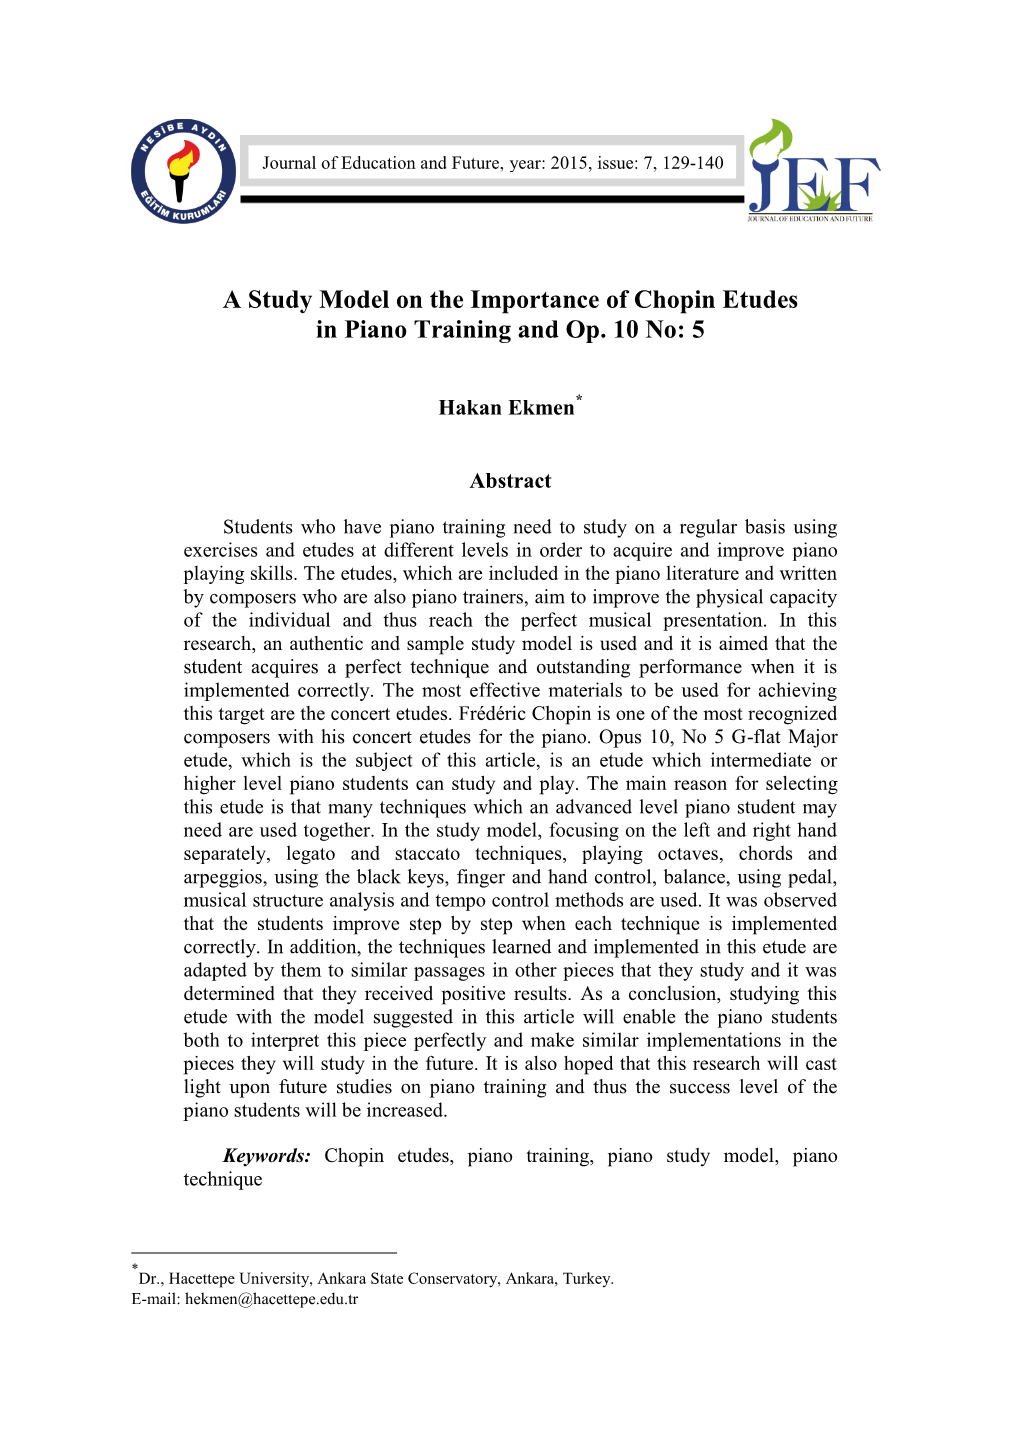 A Study Model on the Importance of Chopin Etudes in Piano Training and Op